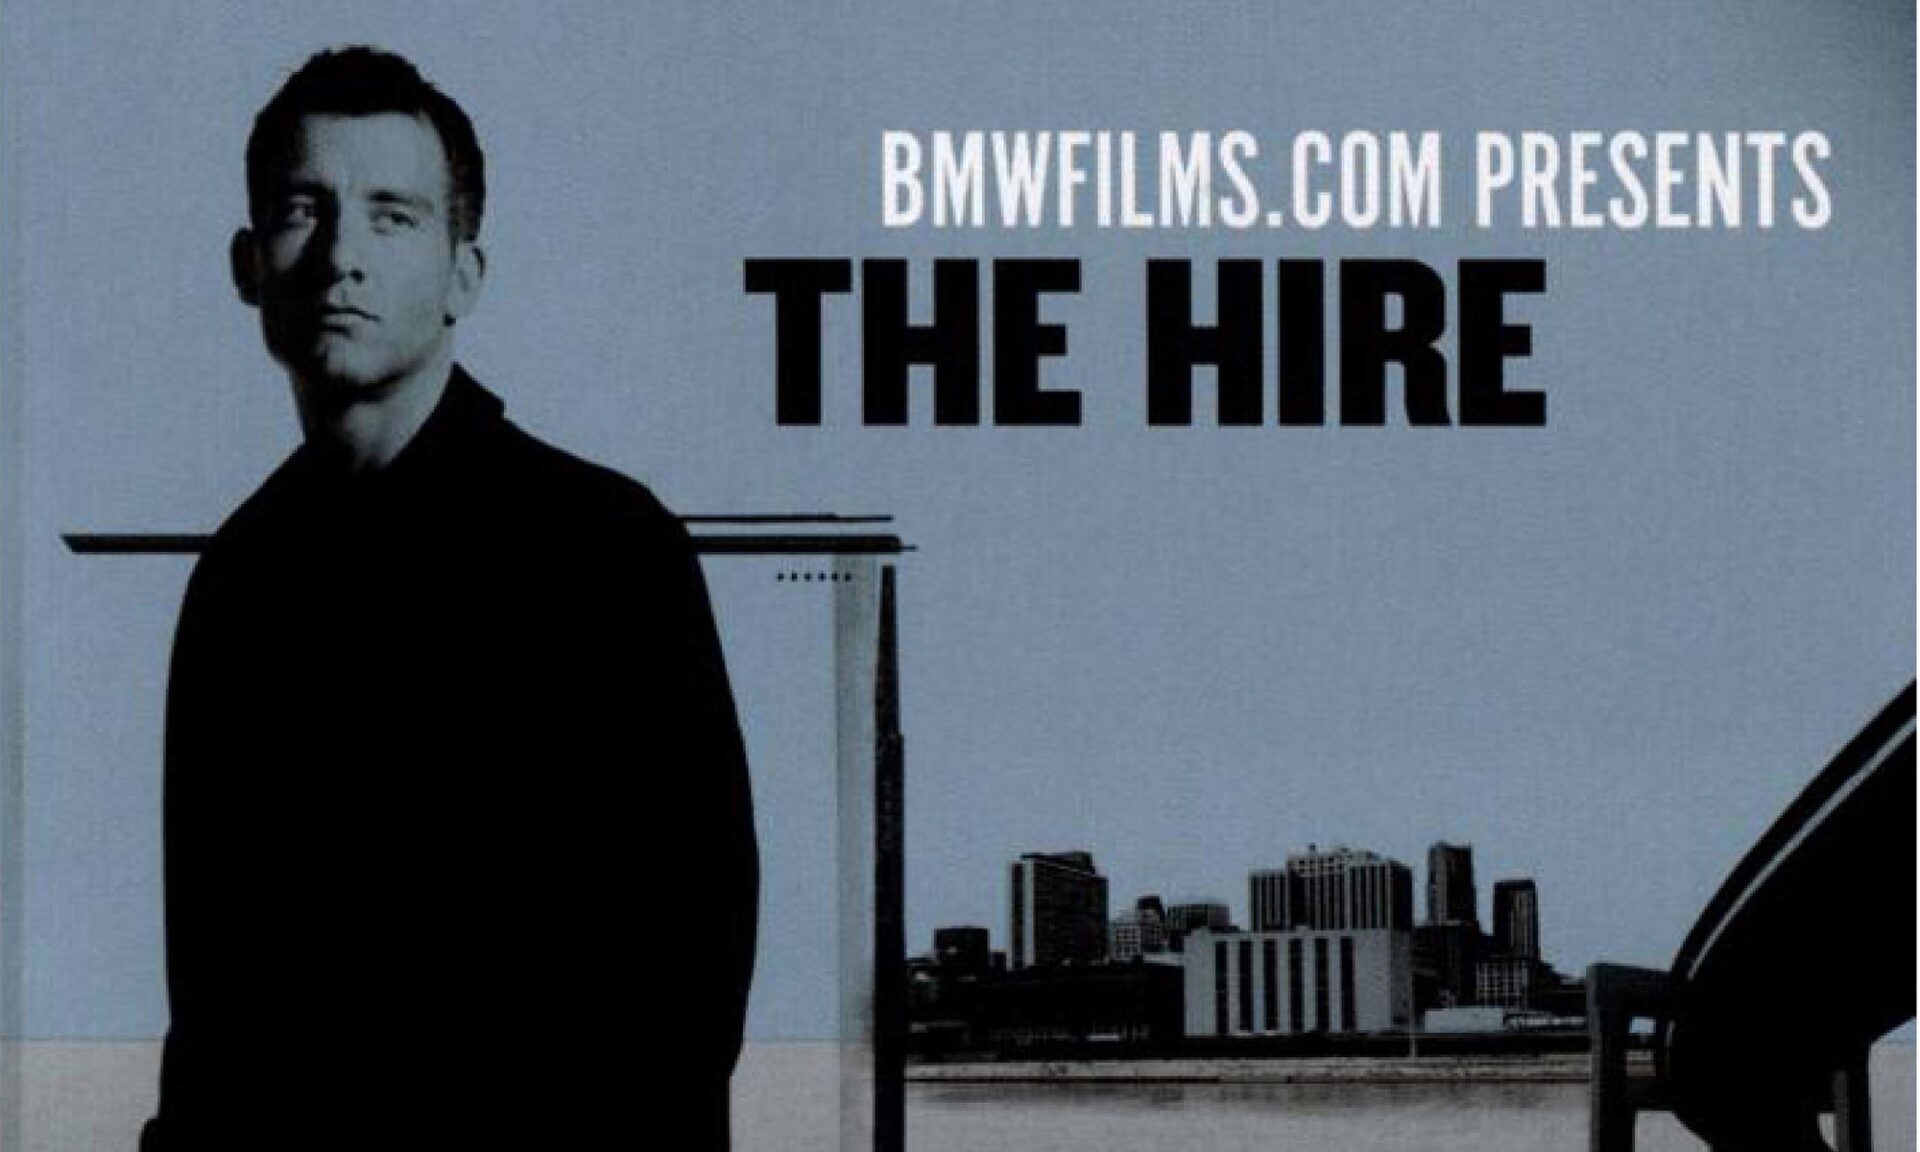 BMW The Hire Campaign